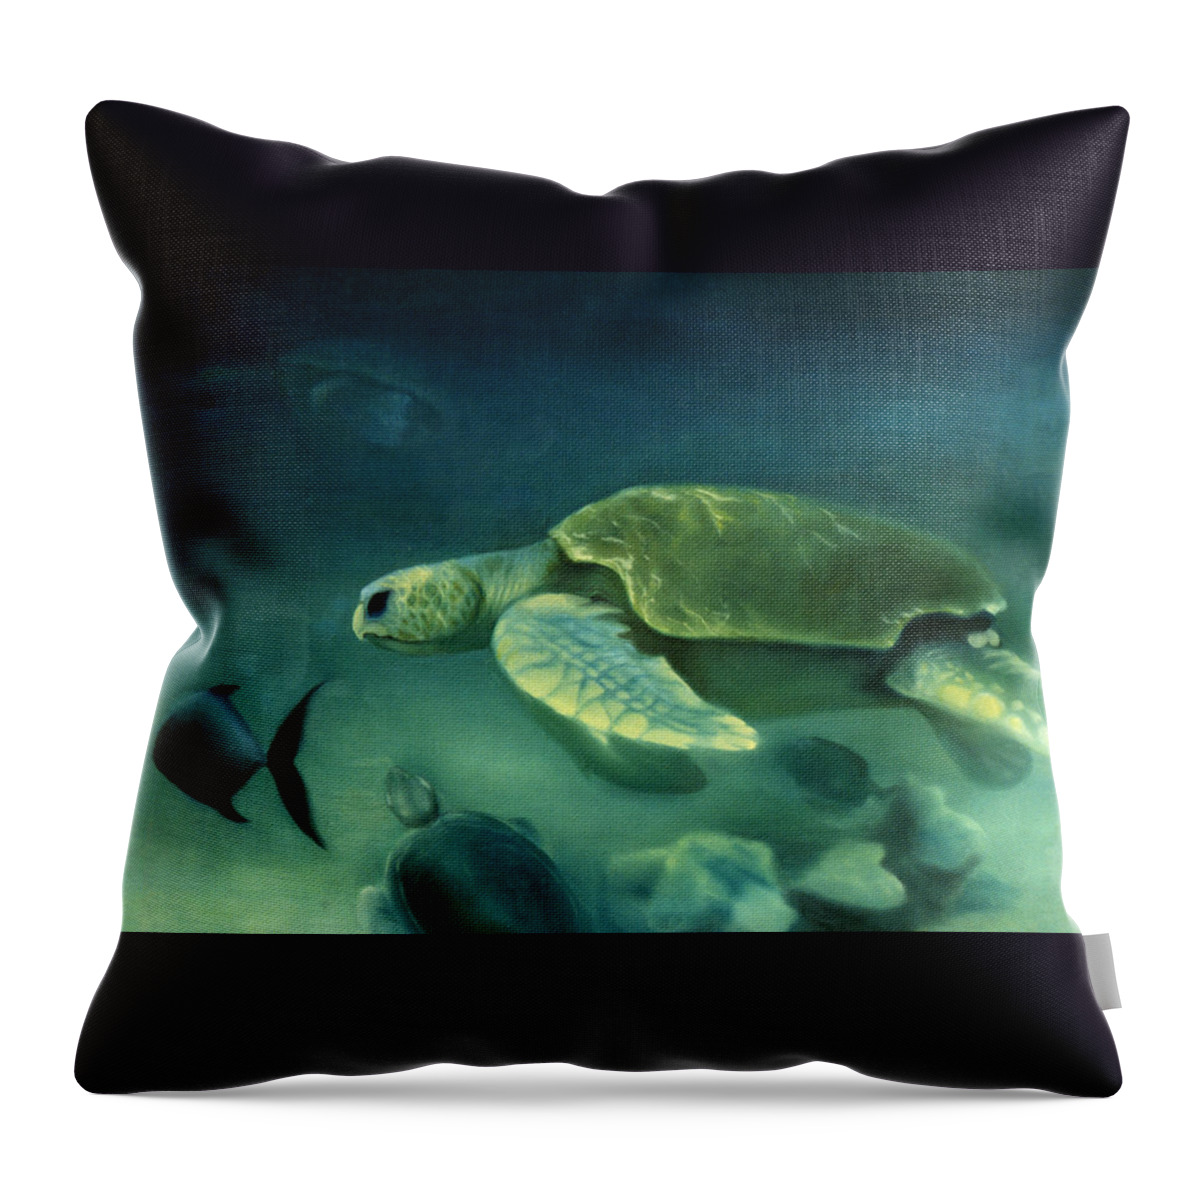 Loggerhead Turtles Throw Pillow featuring the painting Loggerhead Turtle by Anni Adkins